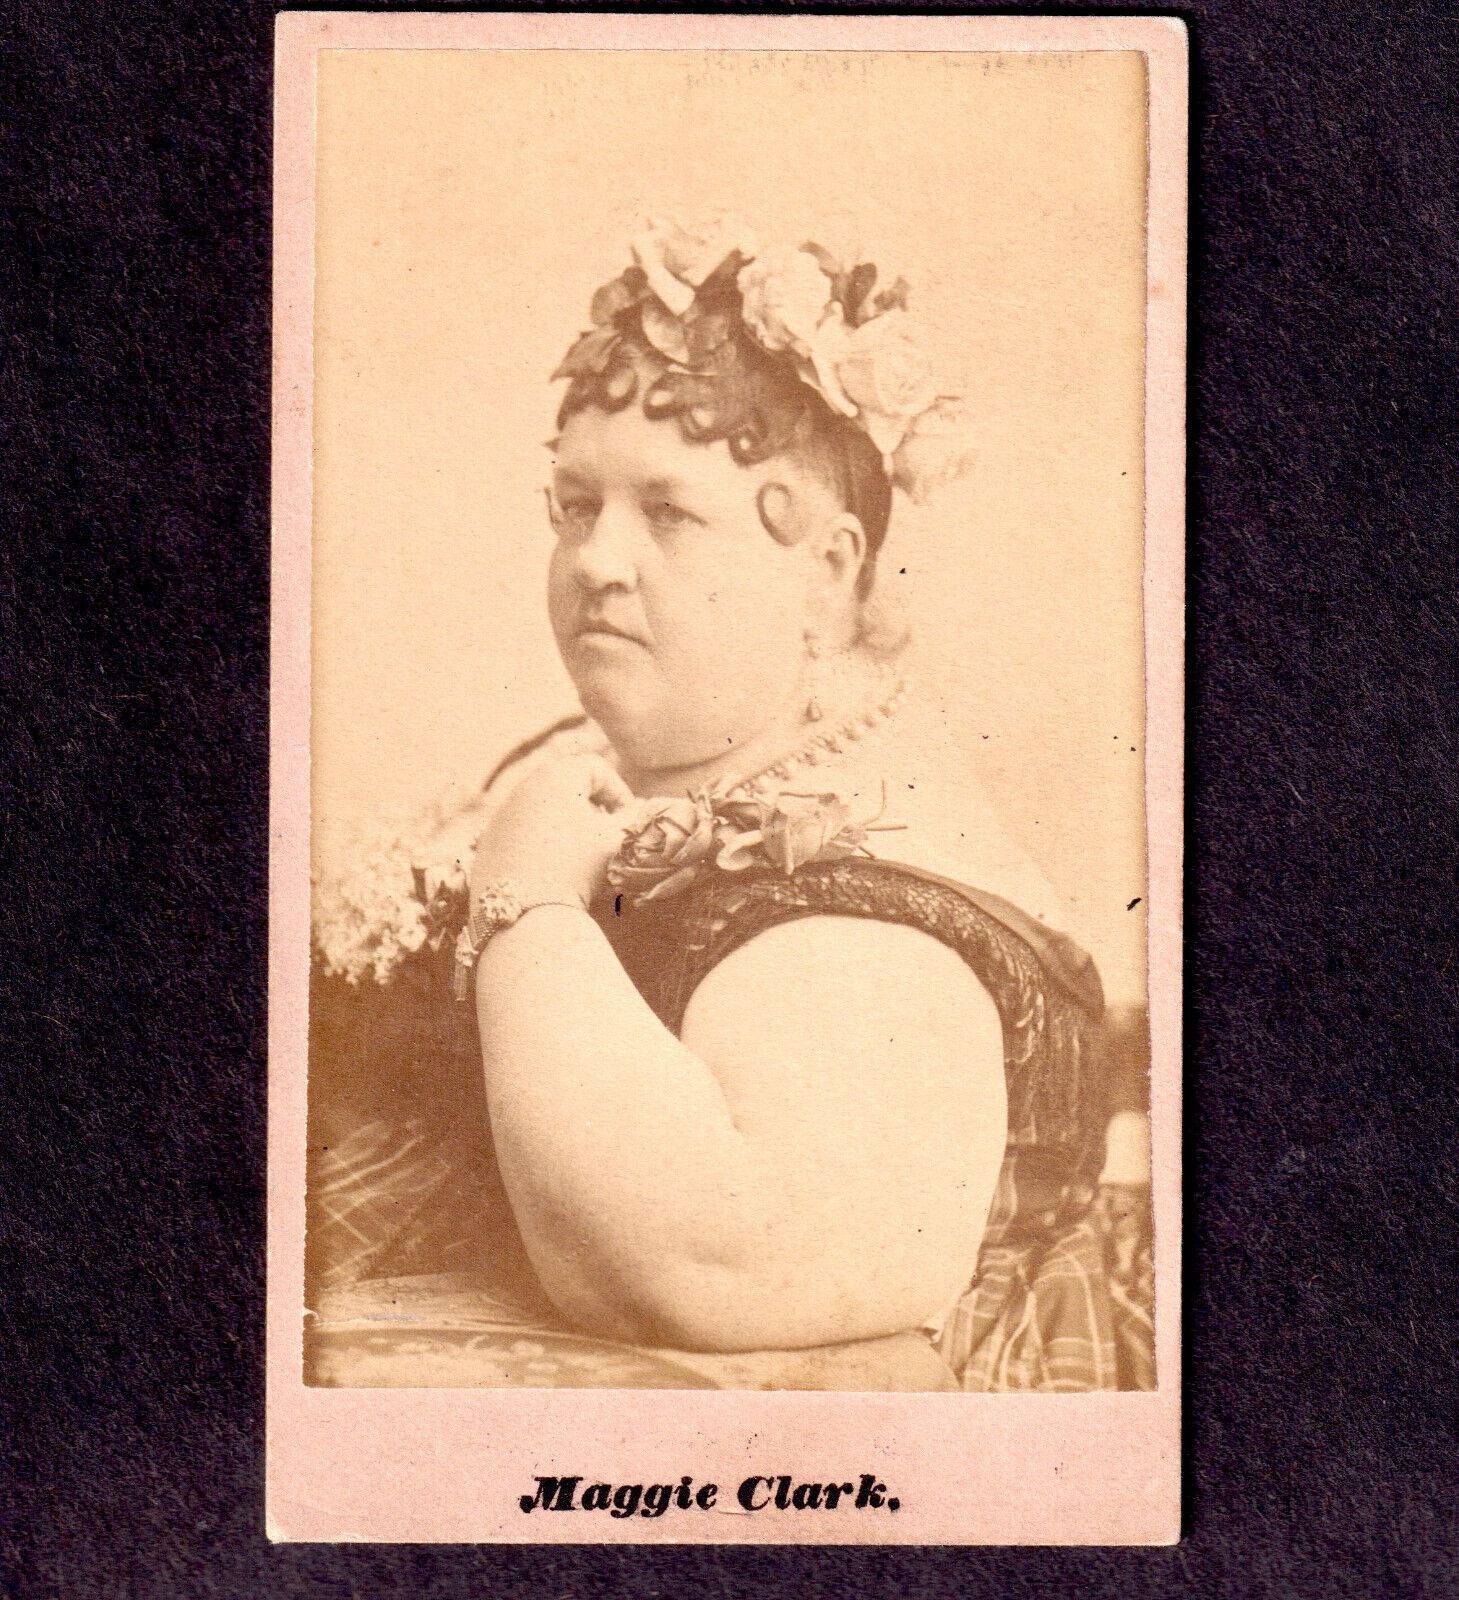 Antique Circus CDV Maggie Clark Fat Lady Sideshow Star Gallery C.L. Weed Detroit